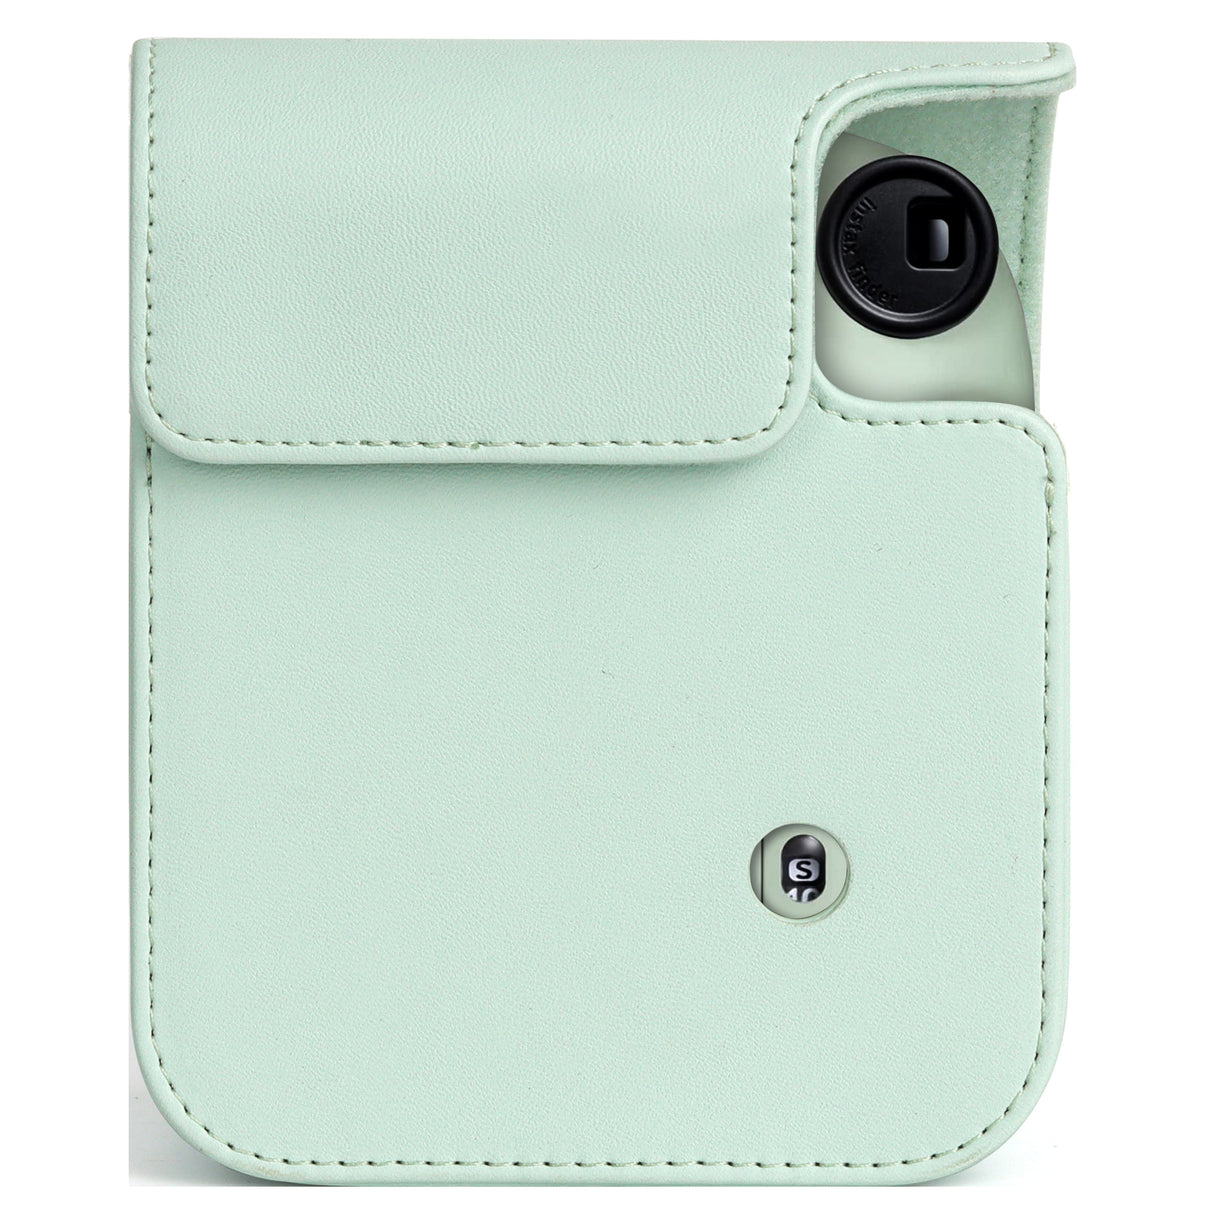 Zikkon Instax Mini 12 Protective Camera Case PU Leather Carrying Bag Mint Green